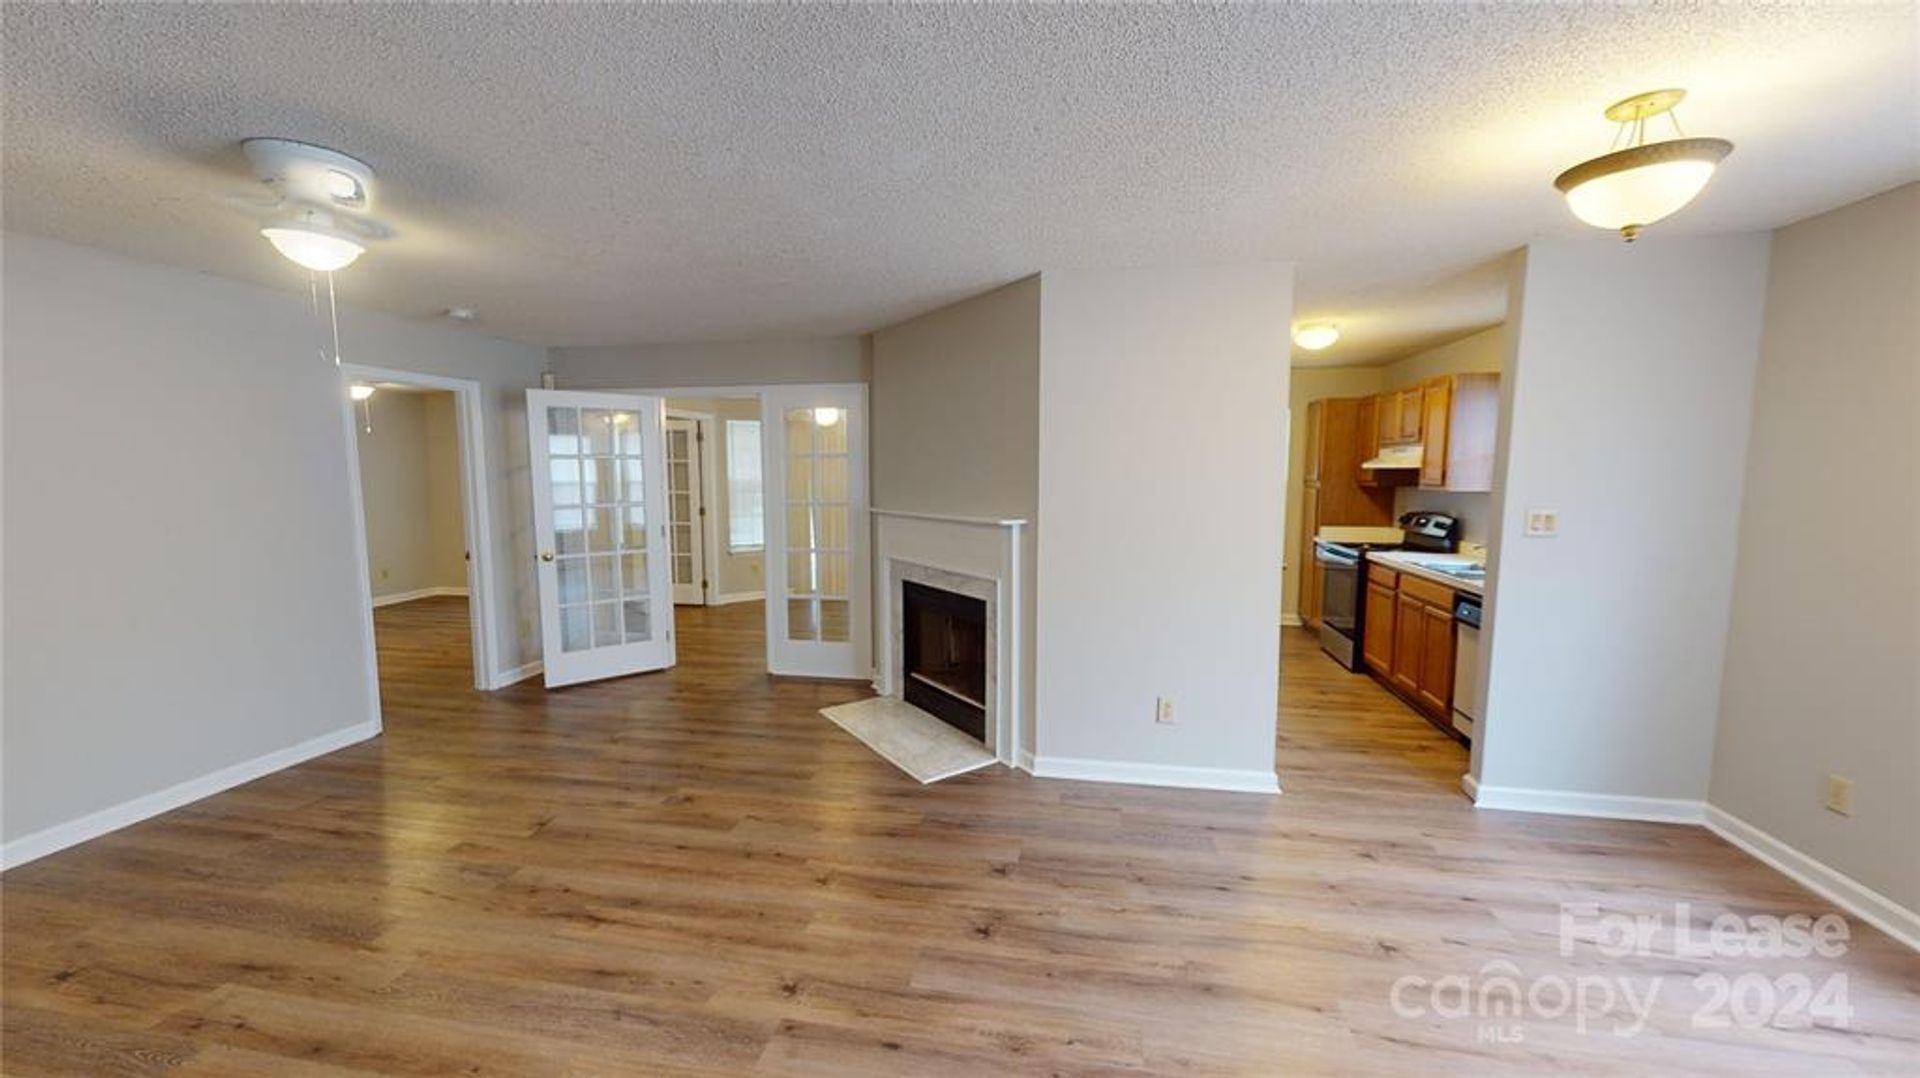 Charming one-story 1st level end unit condo